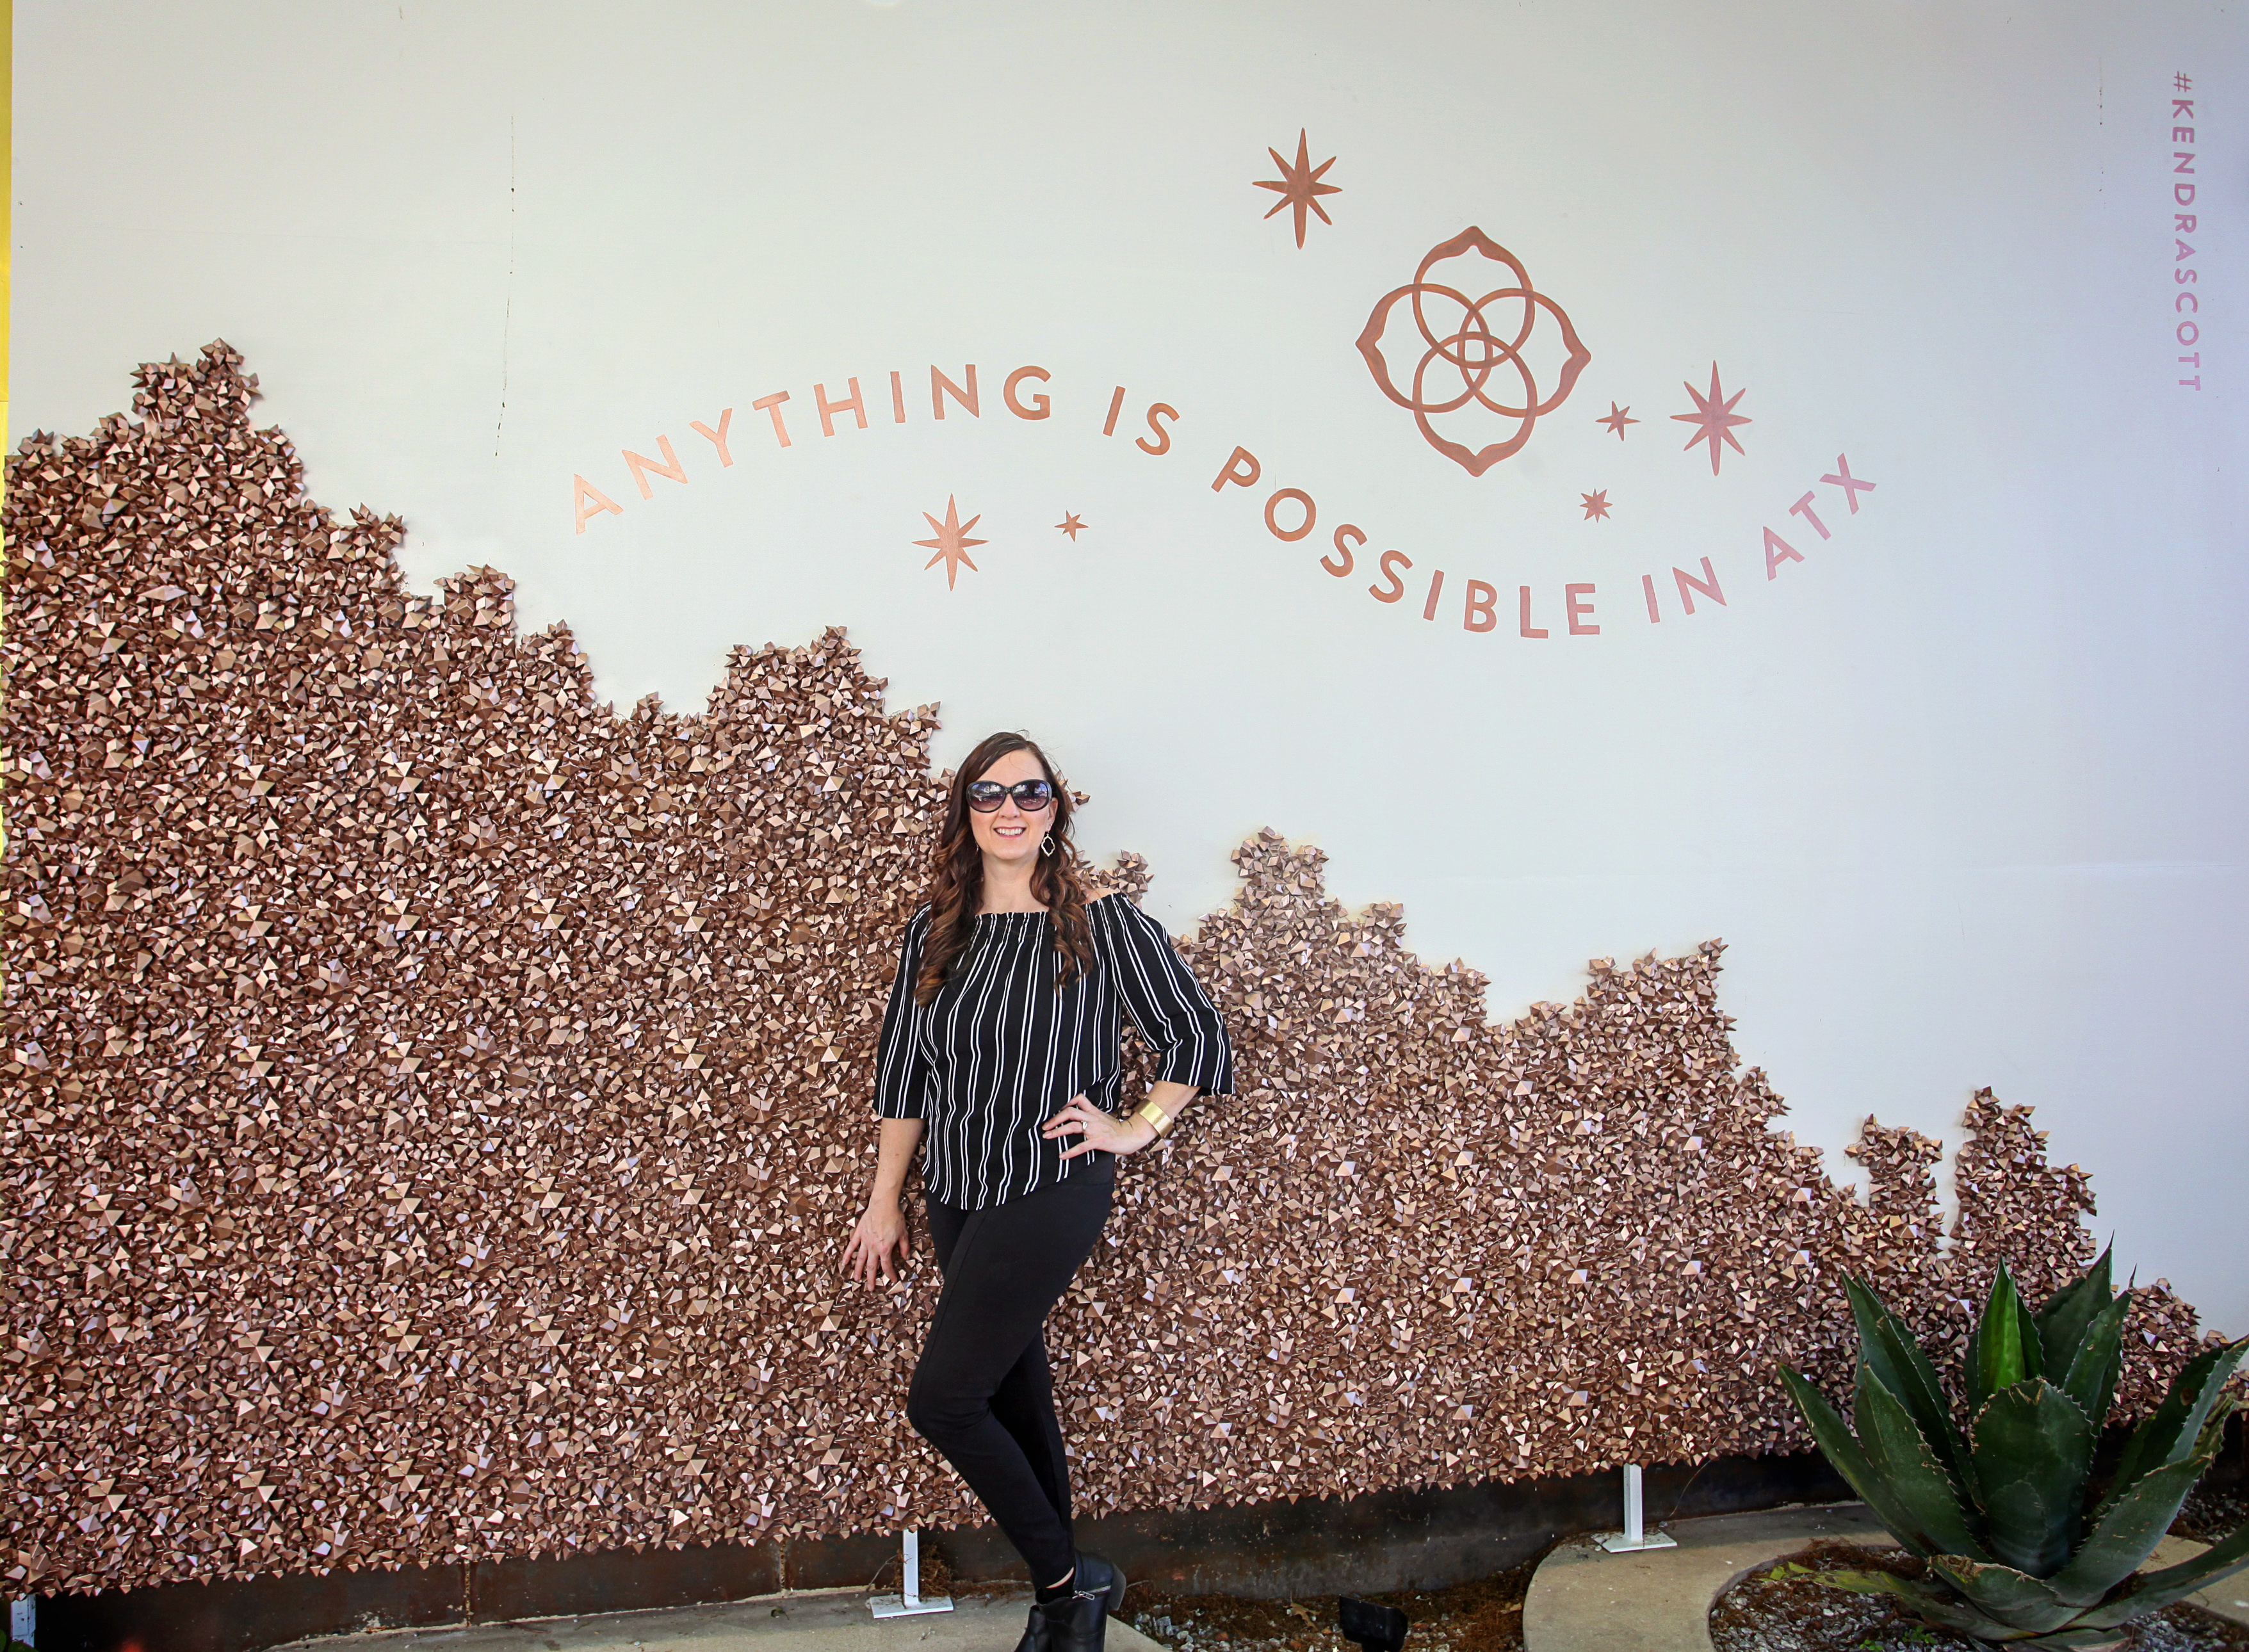 Kendra Scott "Anything is possible in ATX"Instagram Wall 